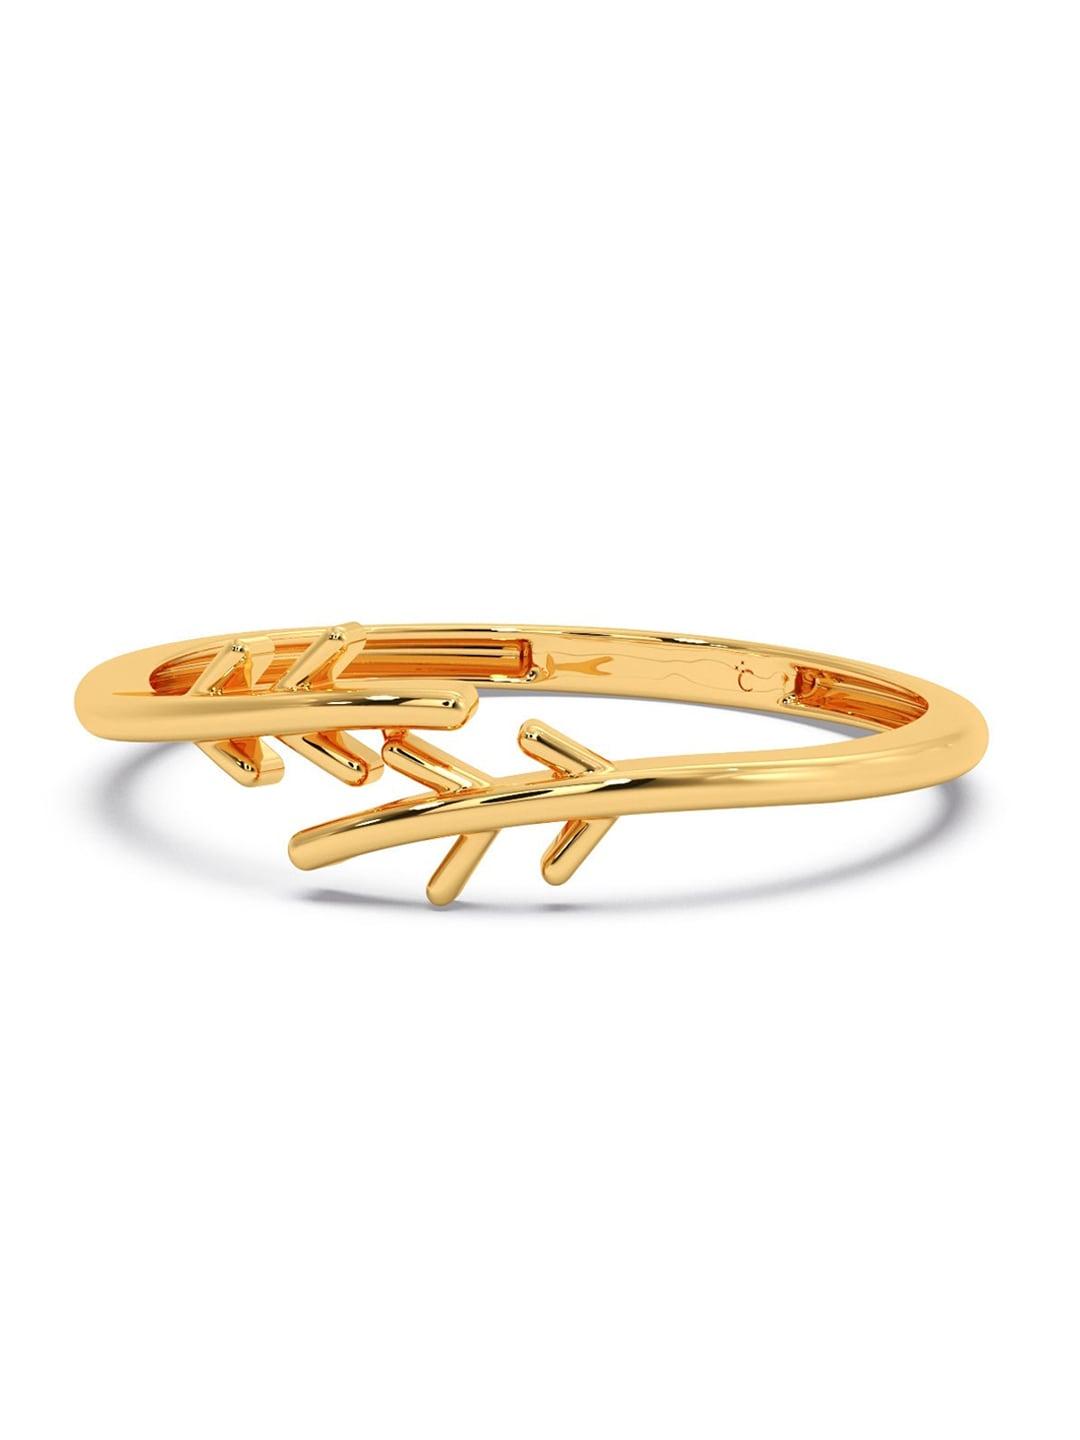 CANDERE A KALYAN JEWELLERS COMPANY 18KT Gold Ring-0.47gm